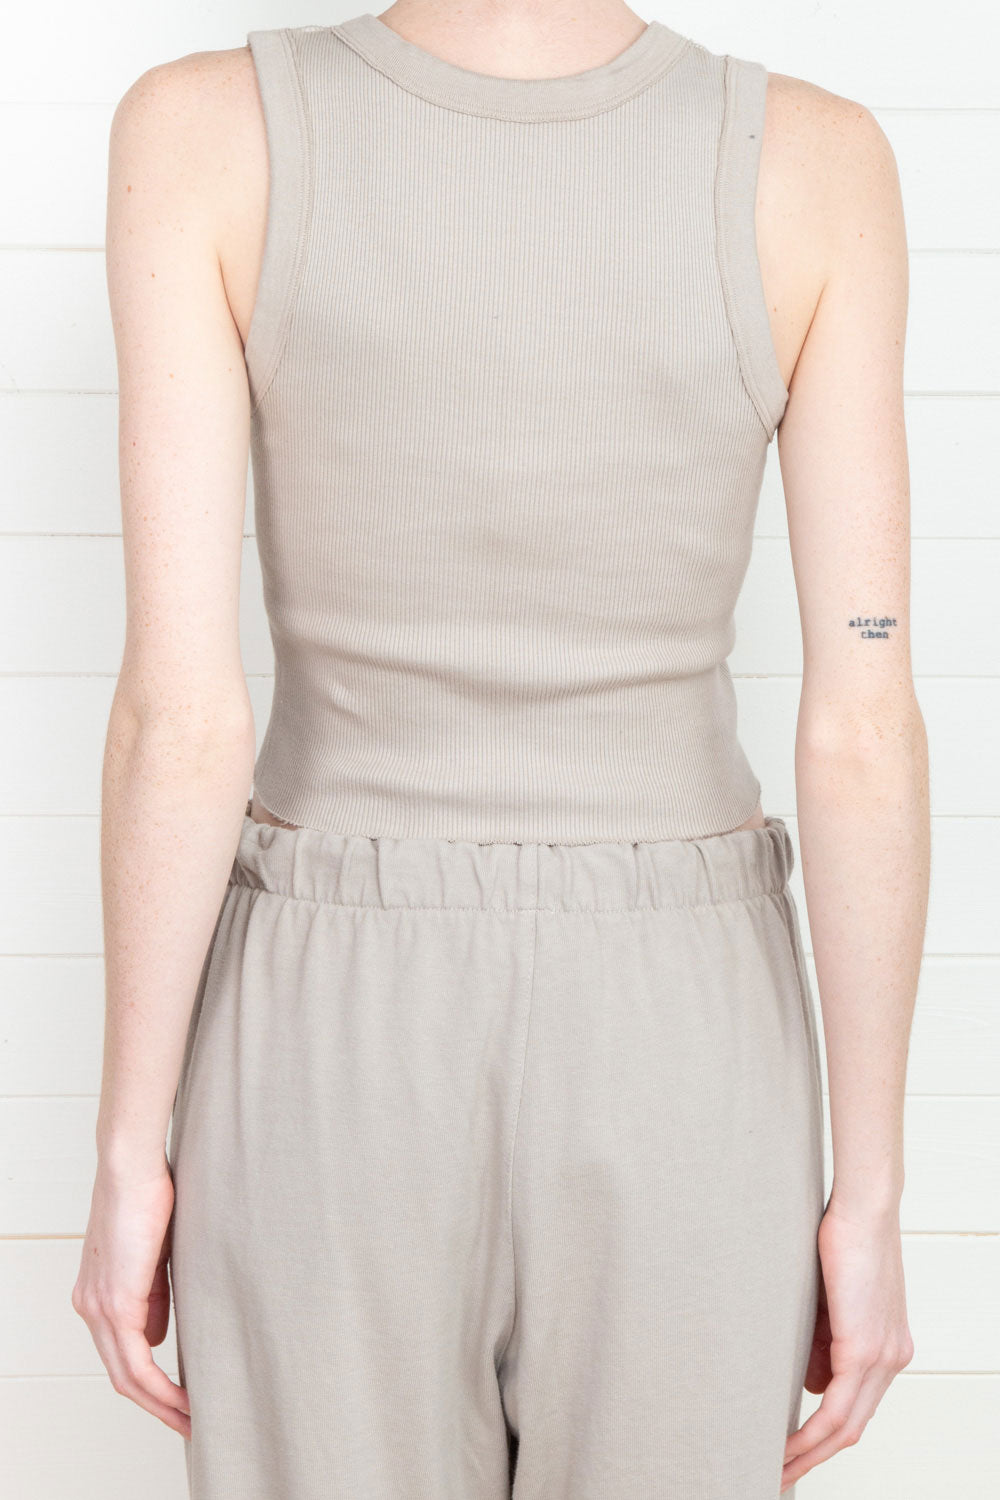 Brandy Melville Brown Connor Tank Top Size undefined - $8 - From